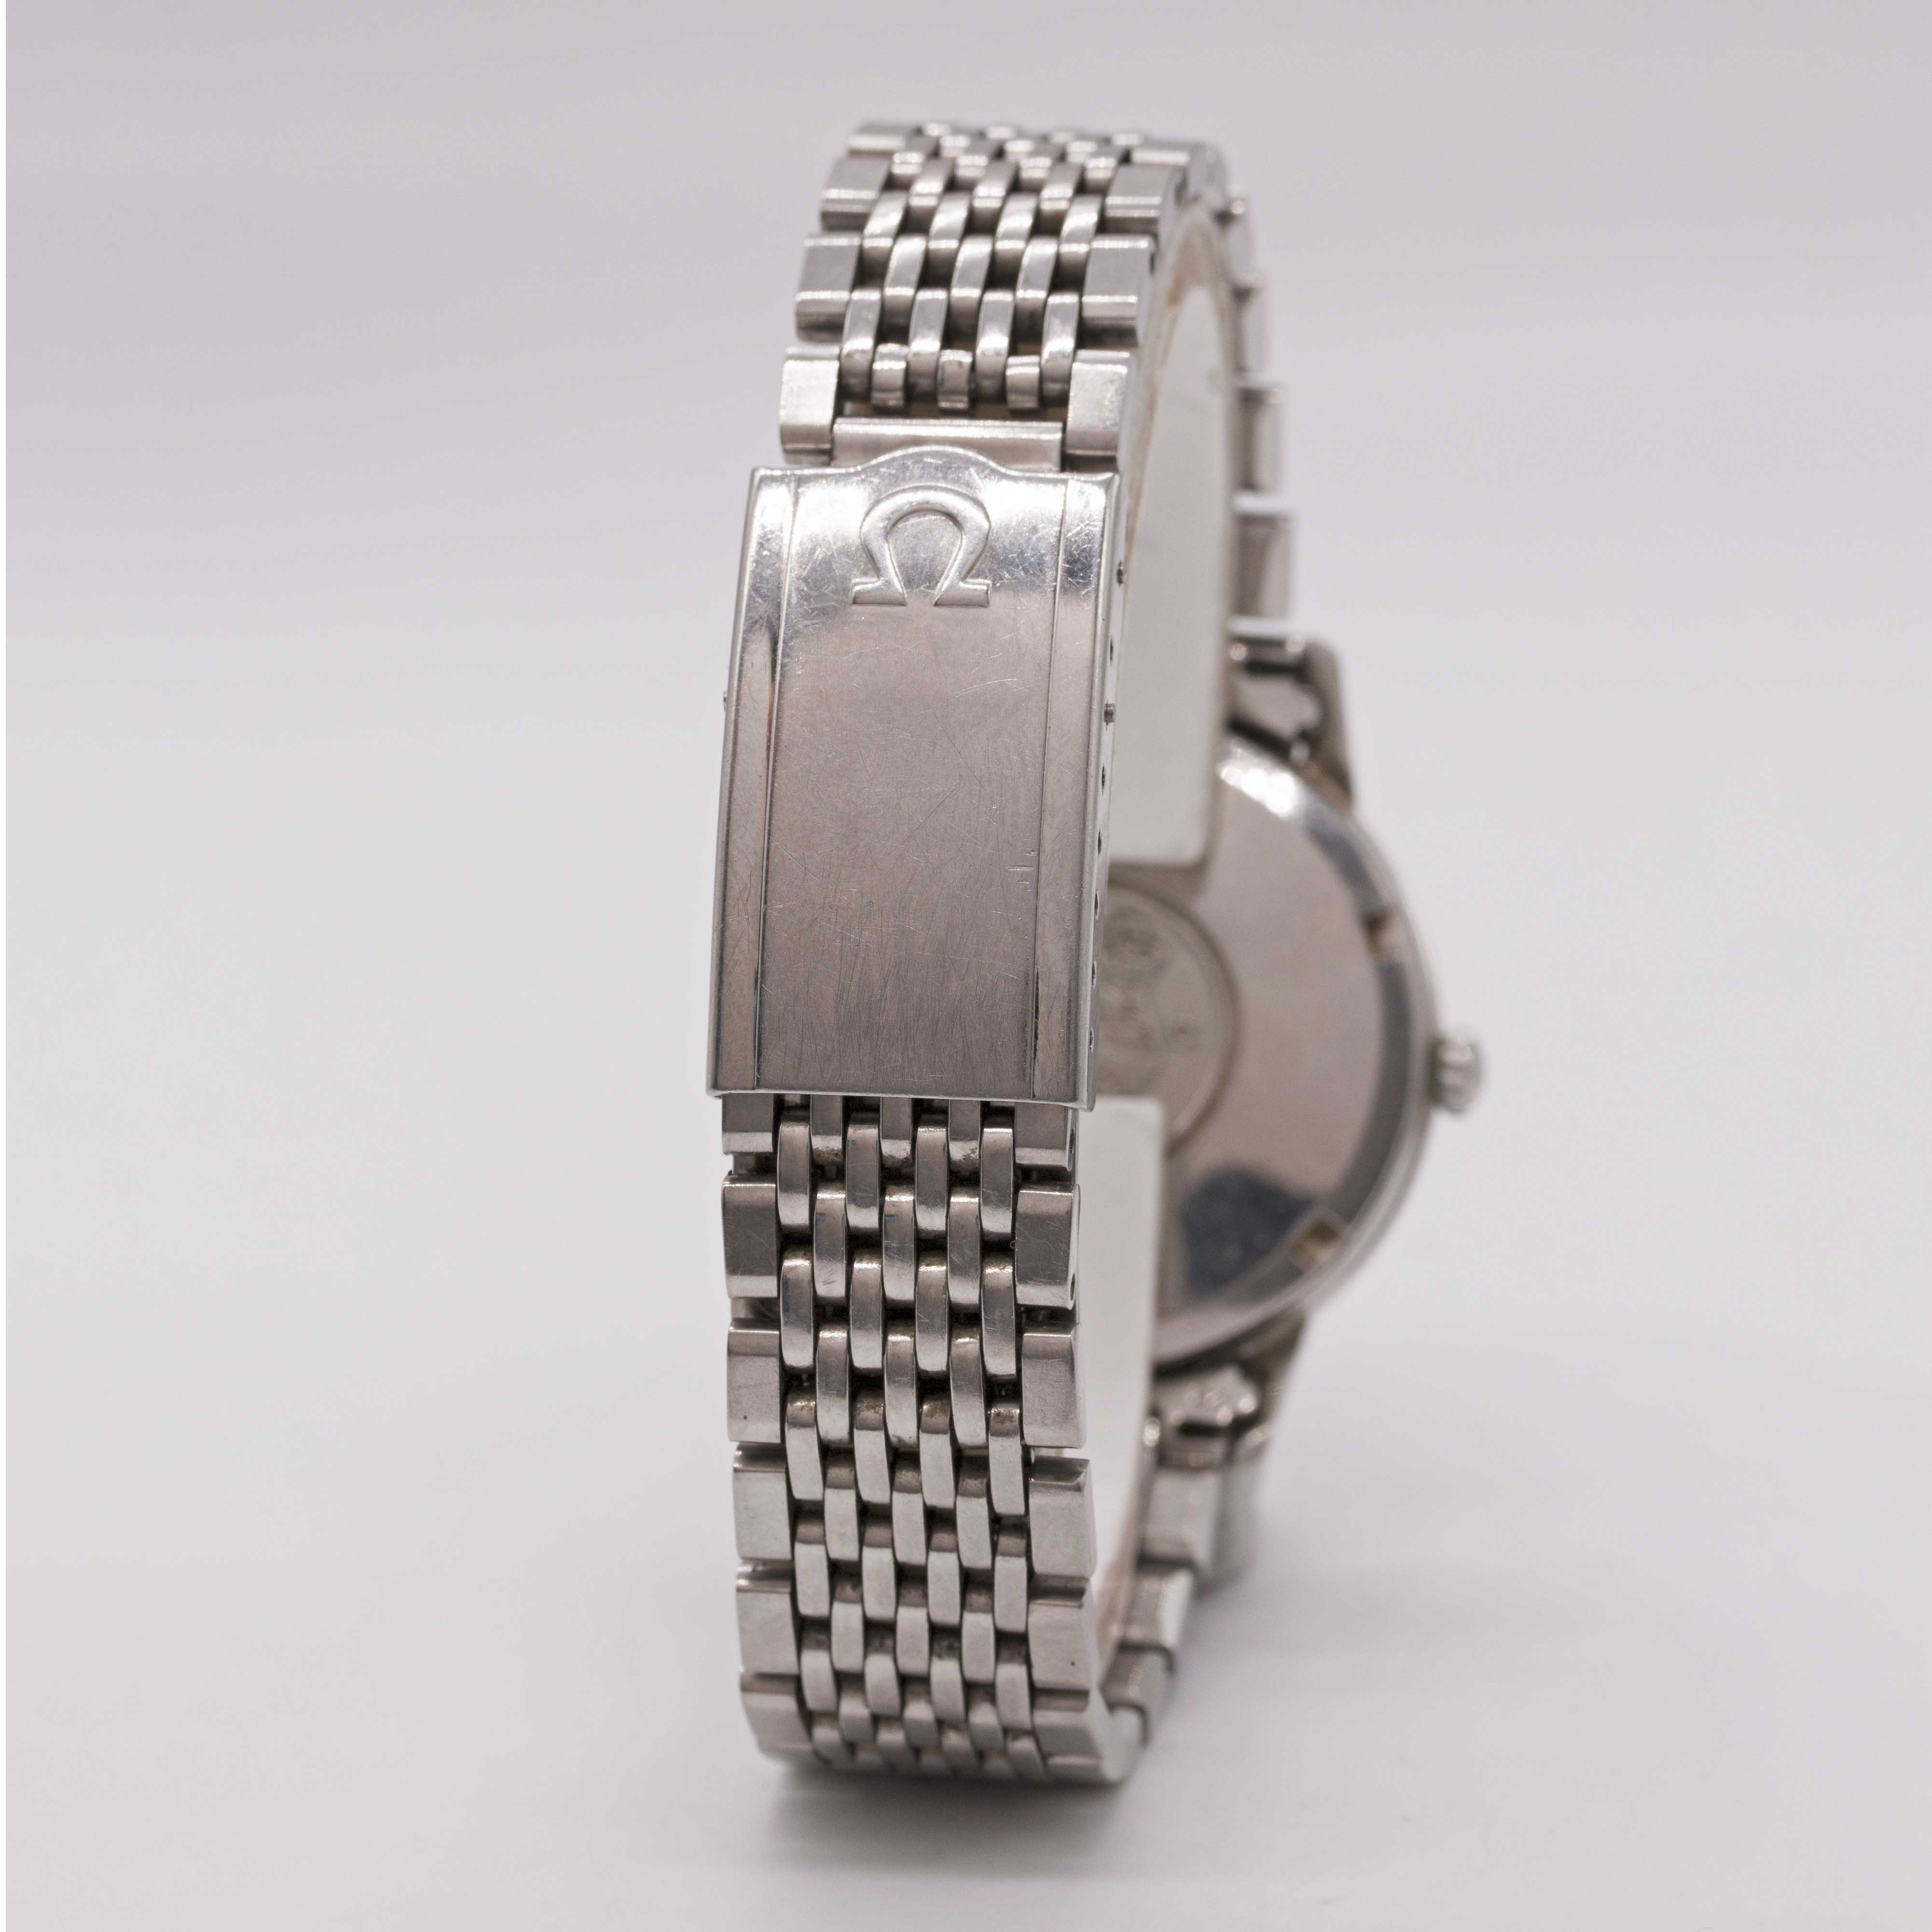 A GENTLEMAN'S STAINLESS STEEL OMEGA SEAMASTER AUTOMATIC BRACELET WATCH CIRCA 1967, REF. 165.002 WITH - Image 5 of 9